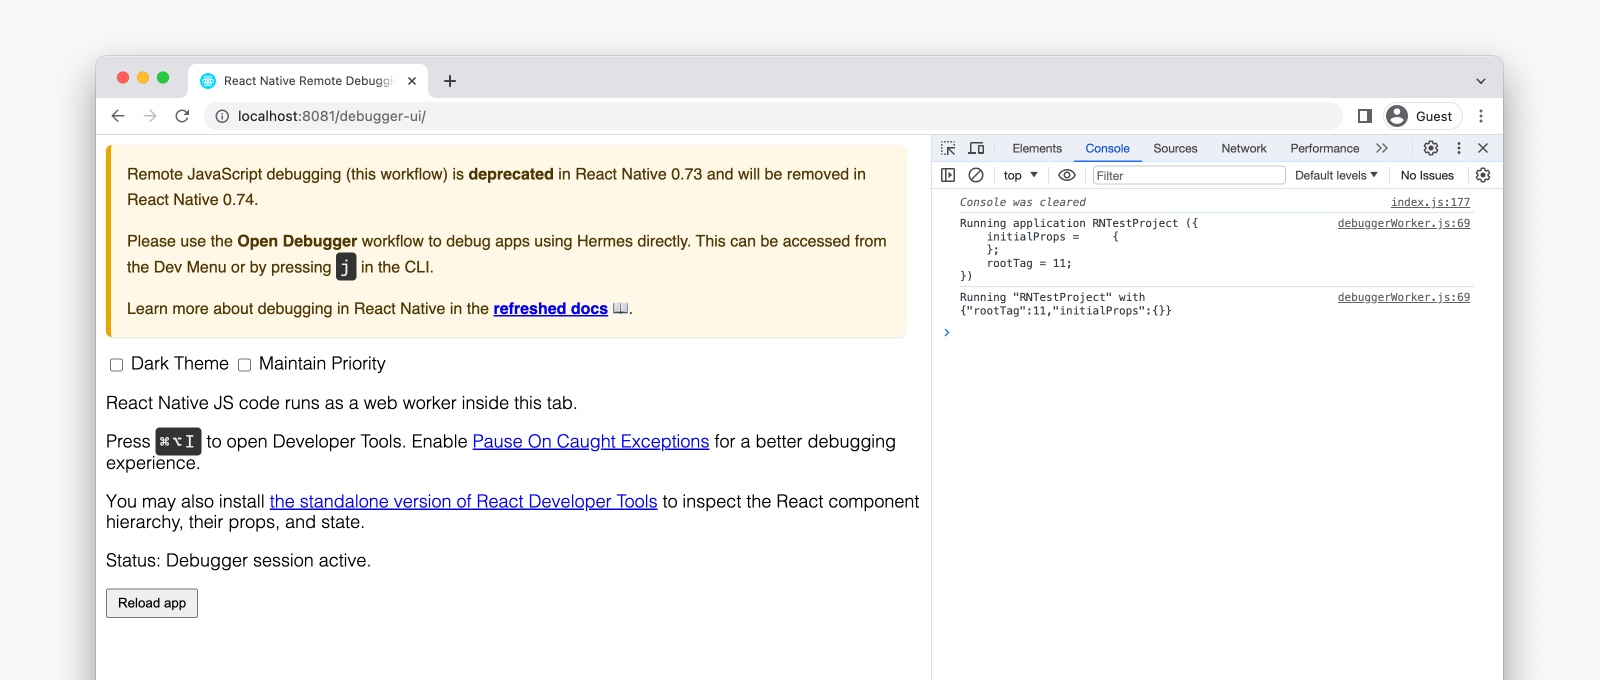 The remote debugger window in Chrome